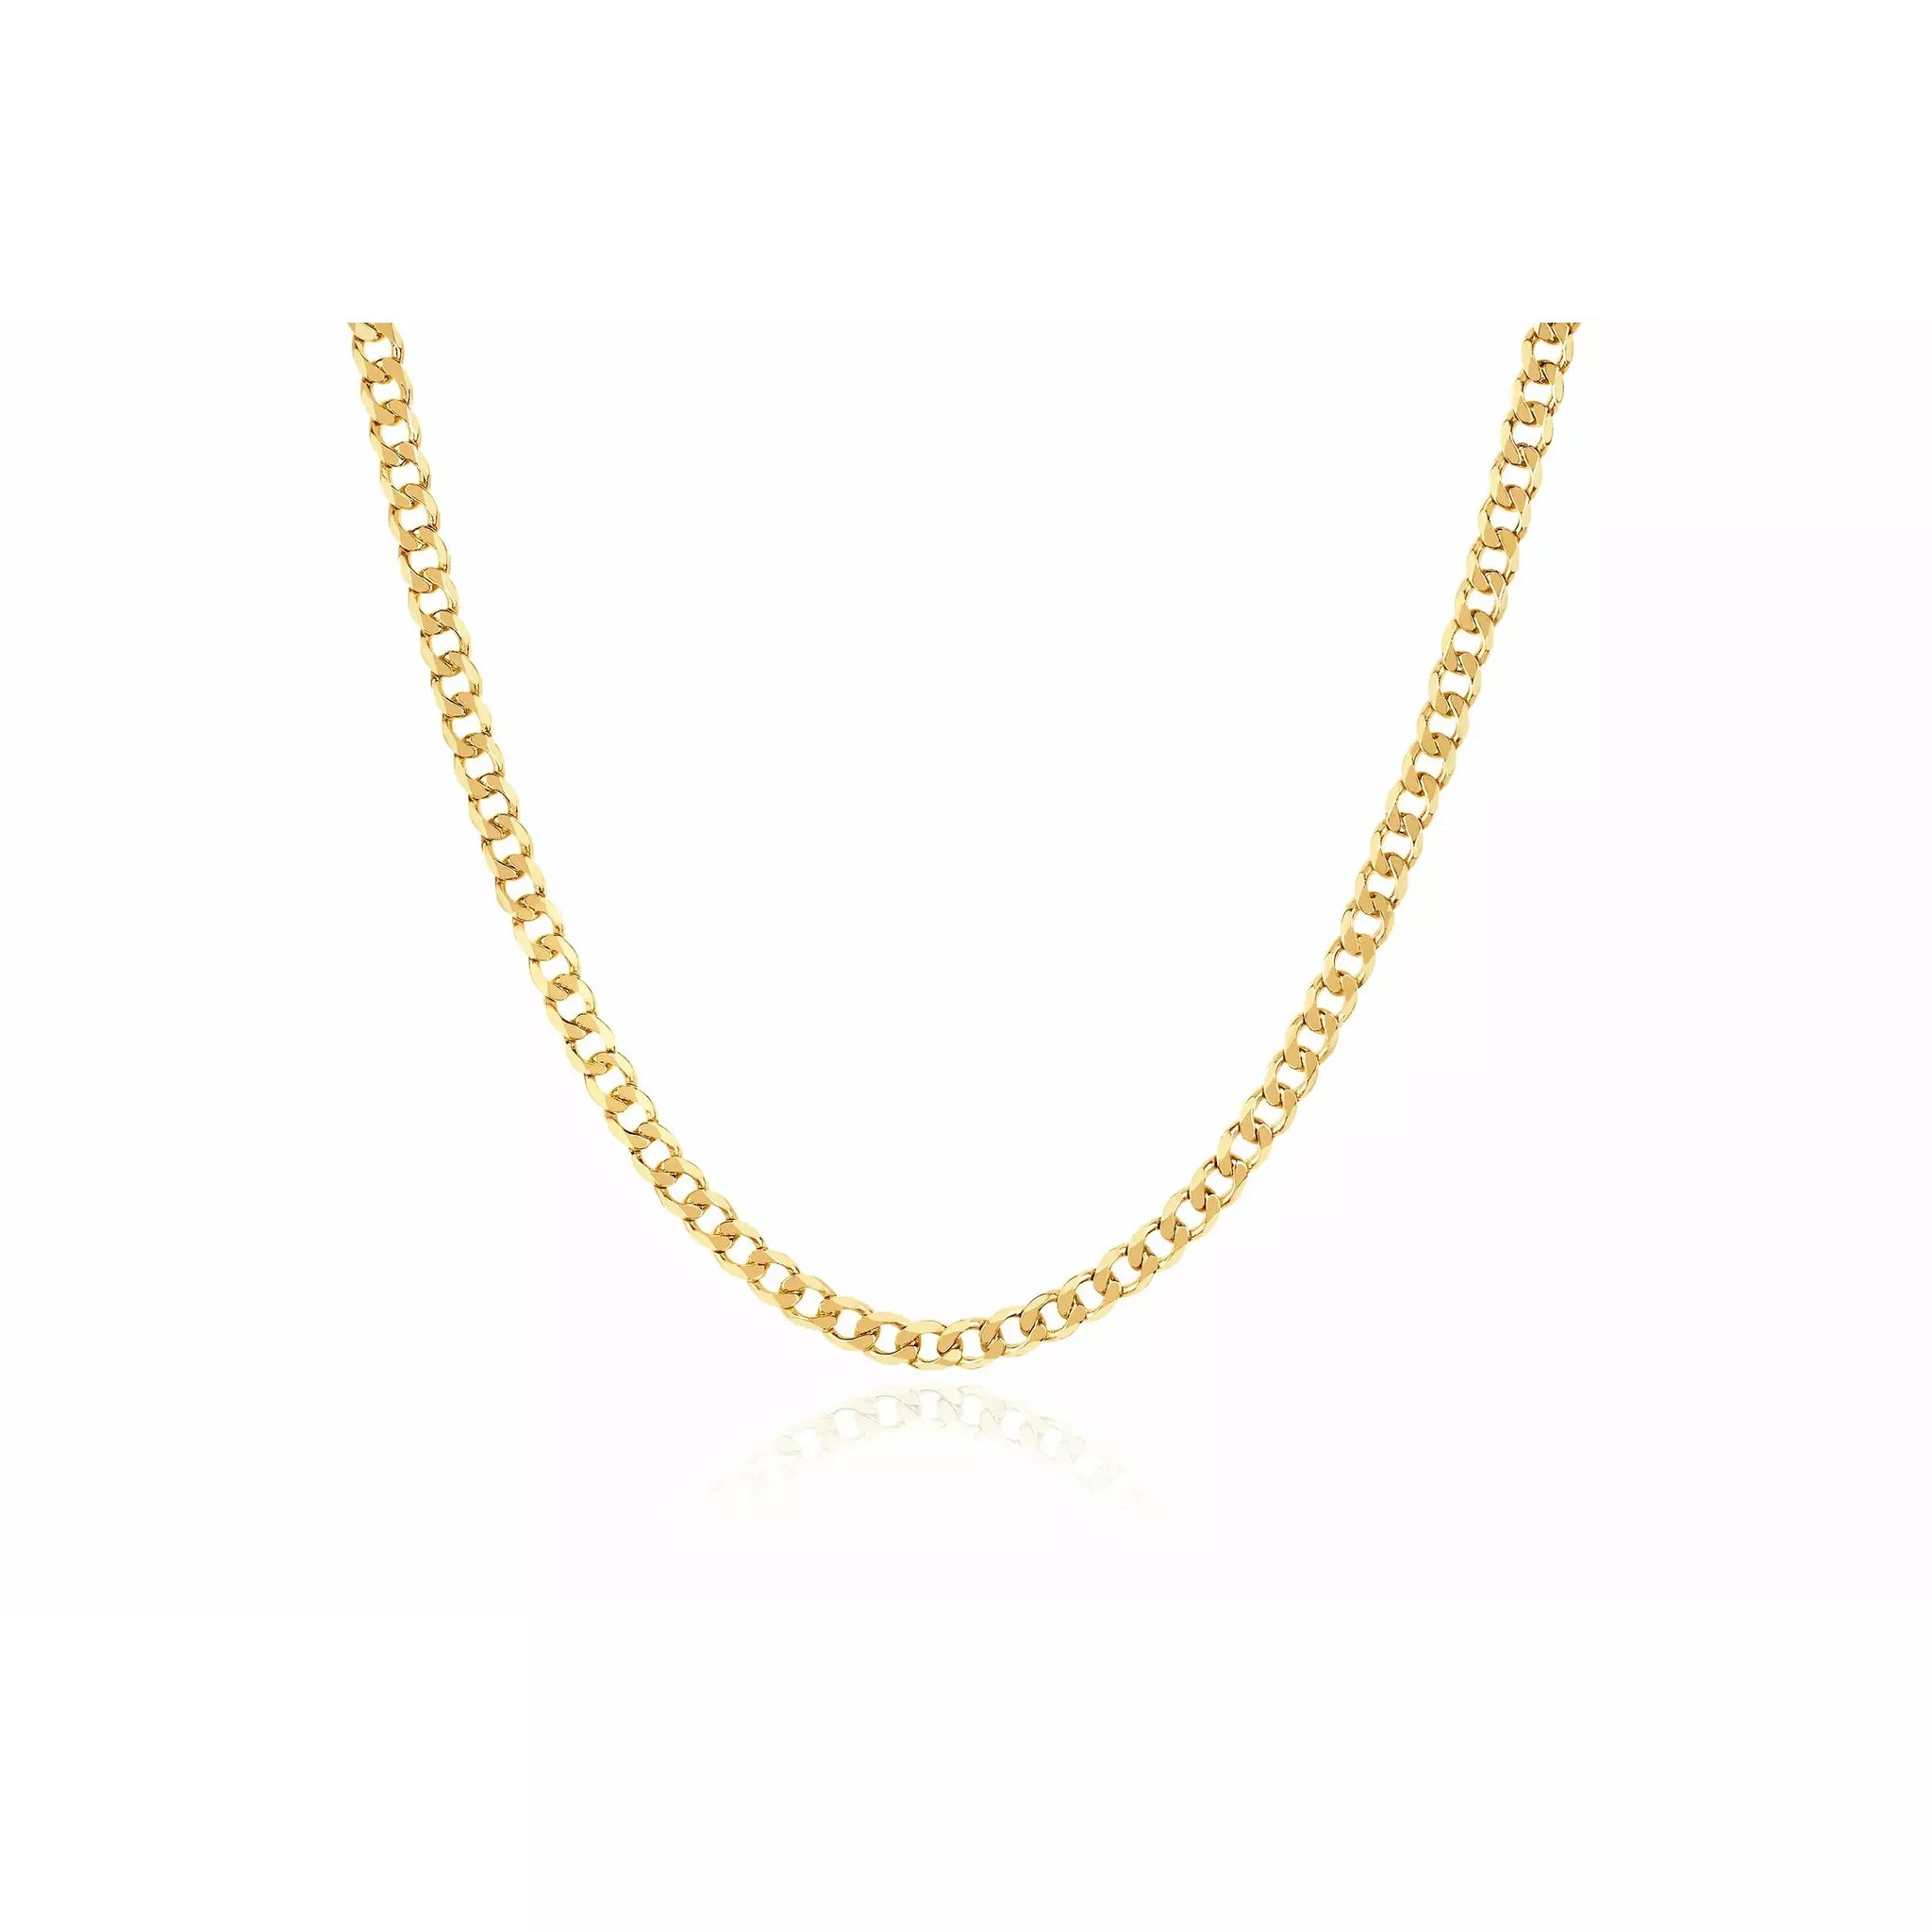 16 Layered Curb Chain Necklace - A New Day™ Gold : Target